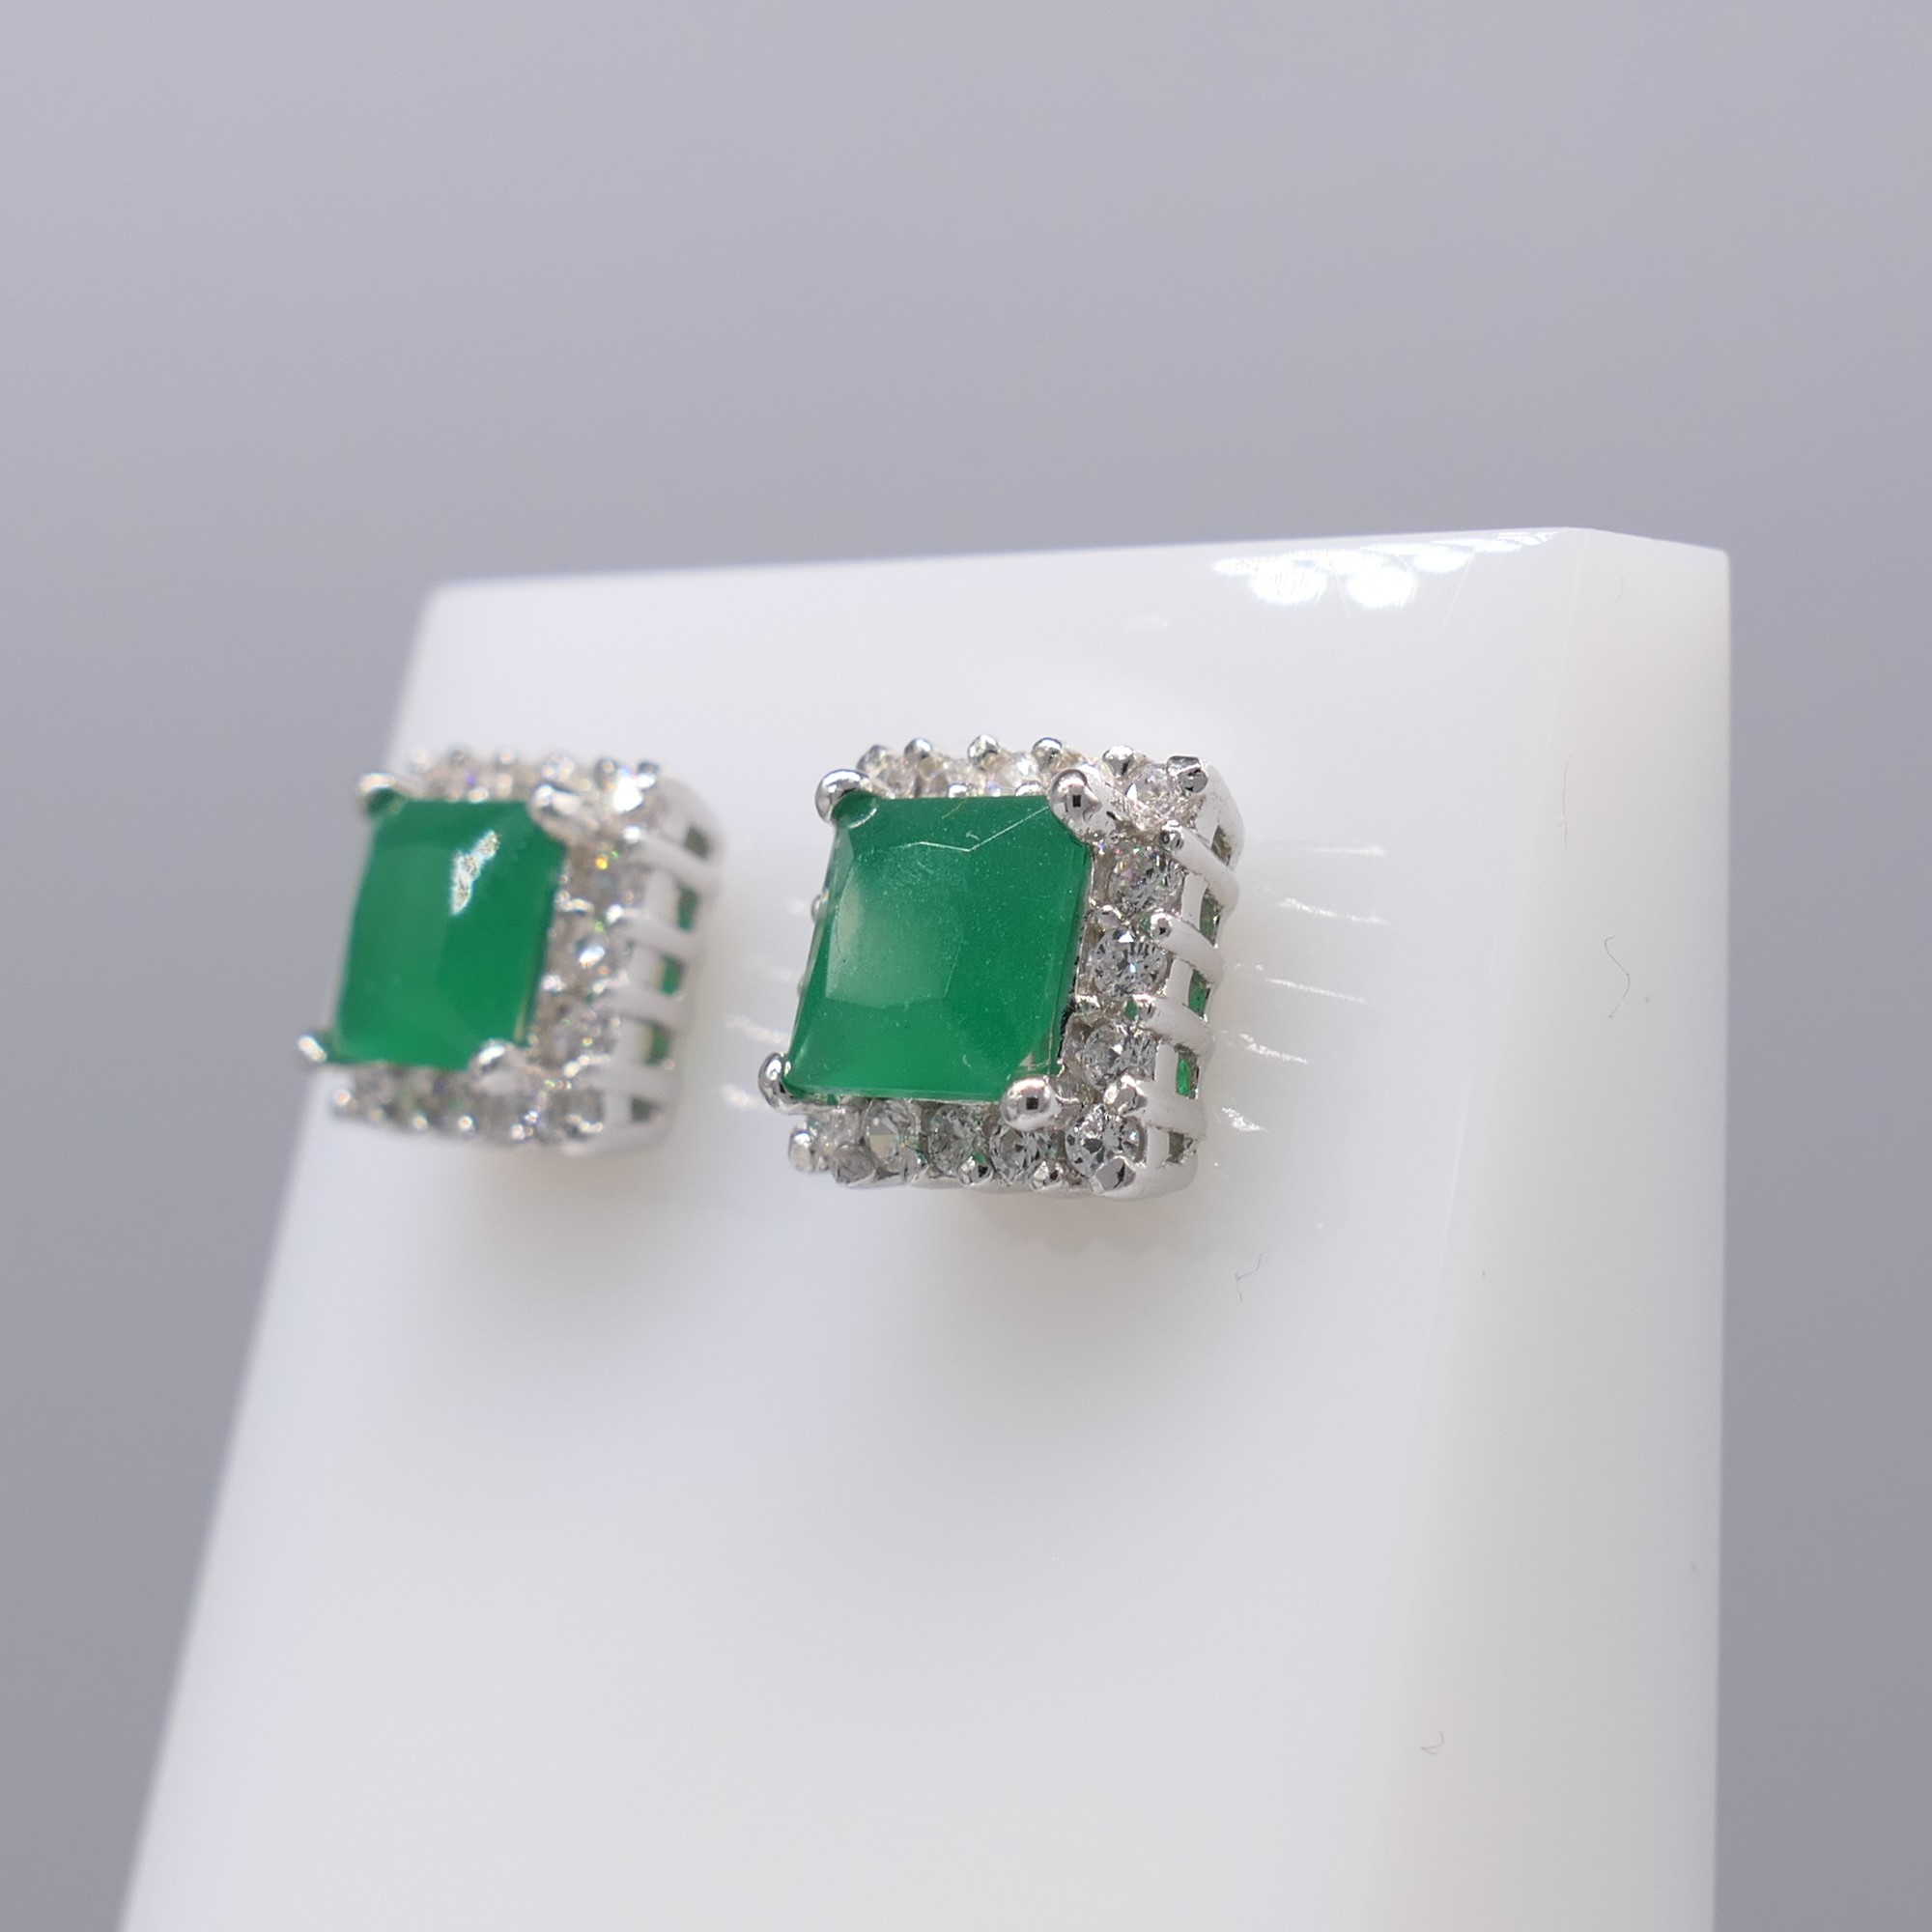 Pair of Silver Square-Set Green and White Cubic Zirconia Ear Studs - Image 4 of 6